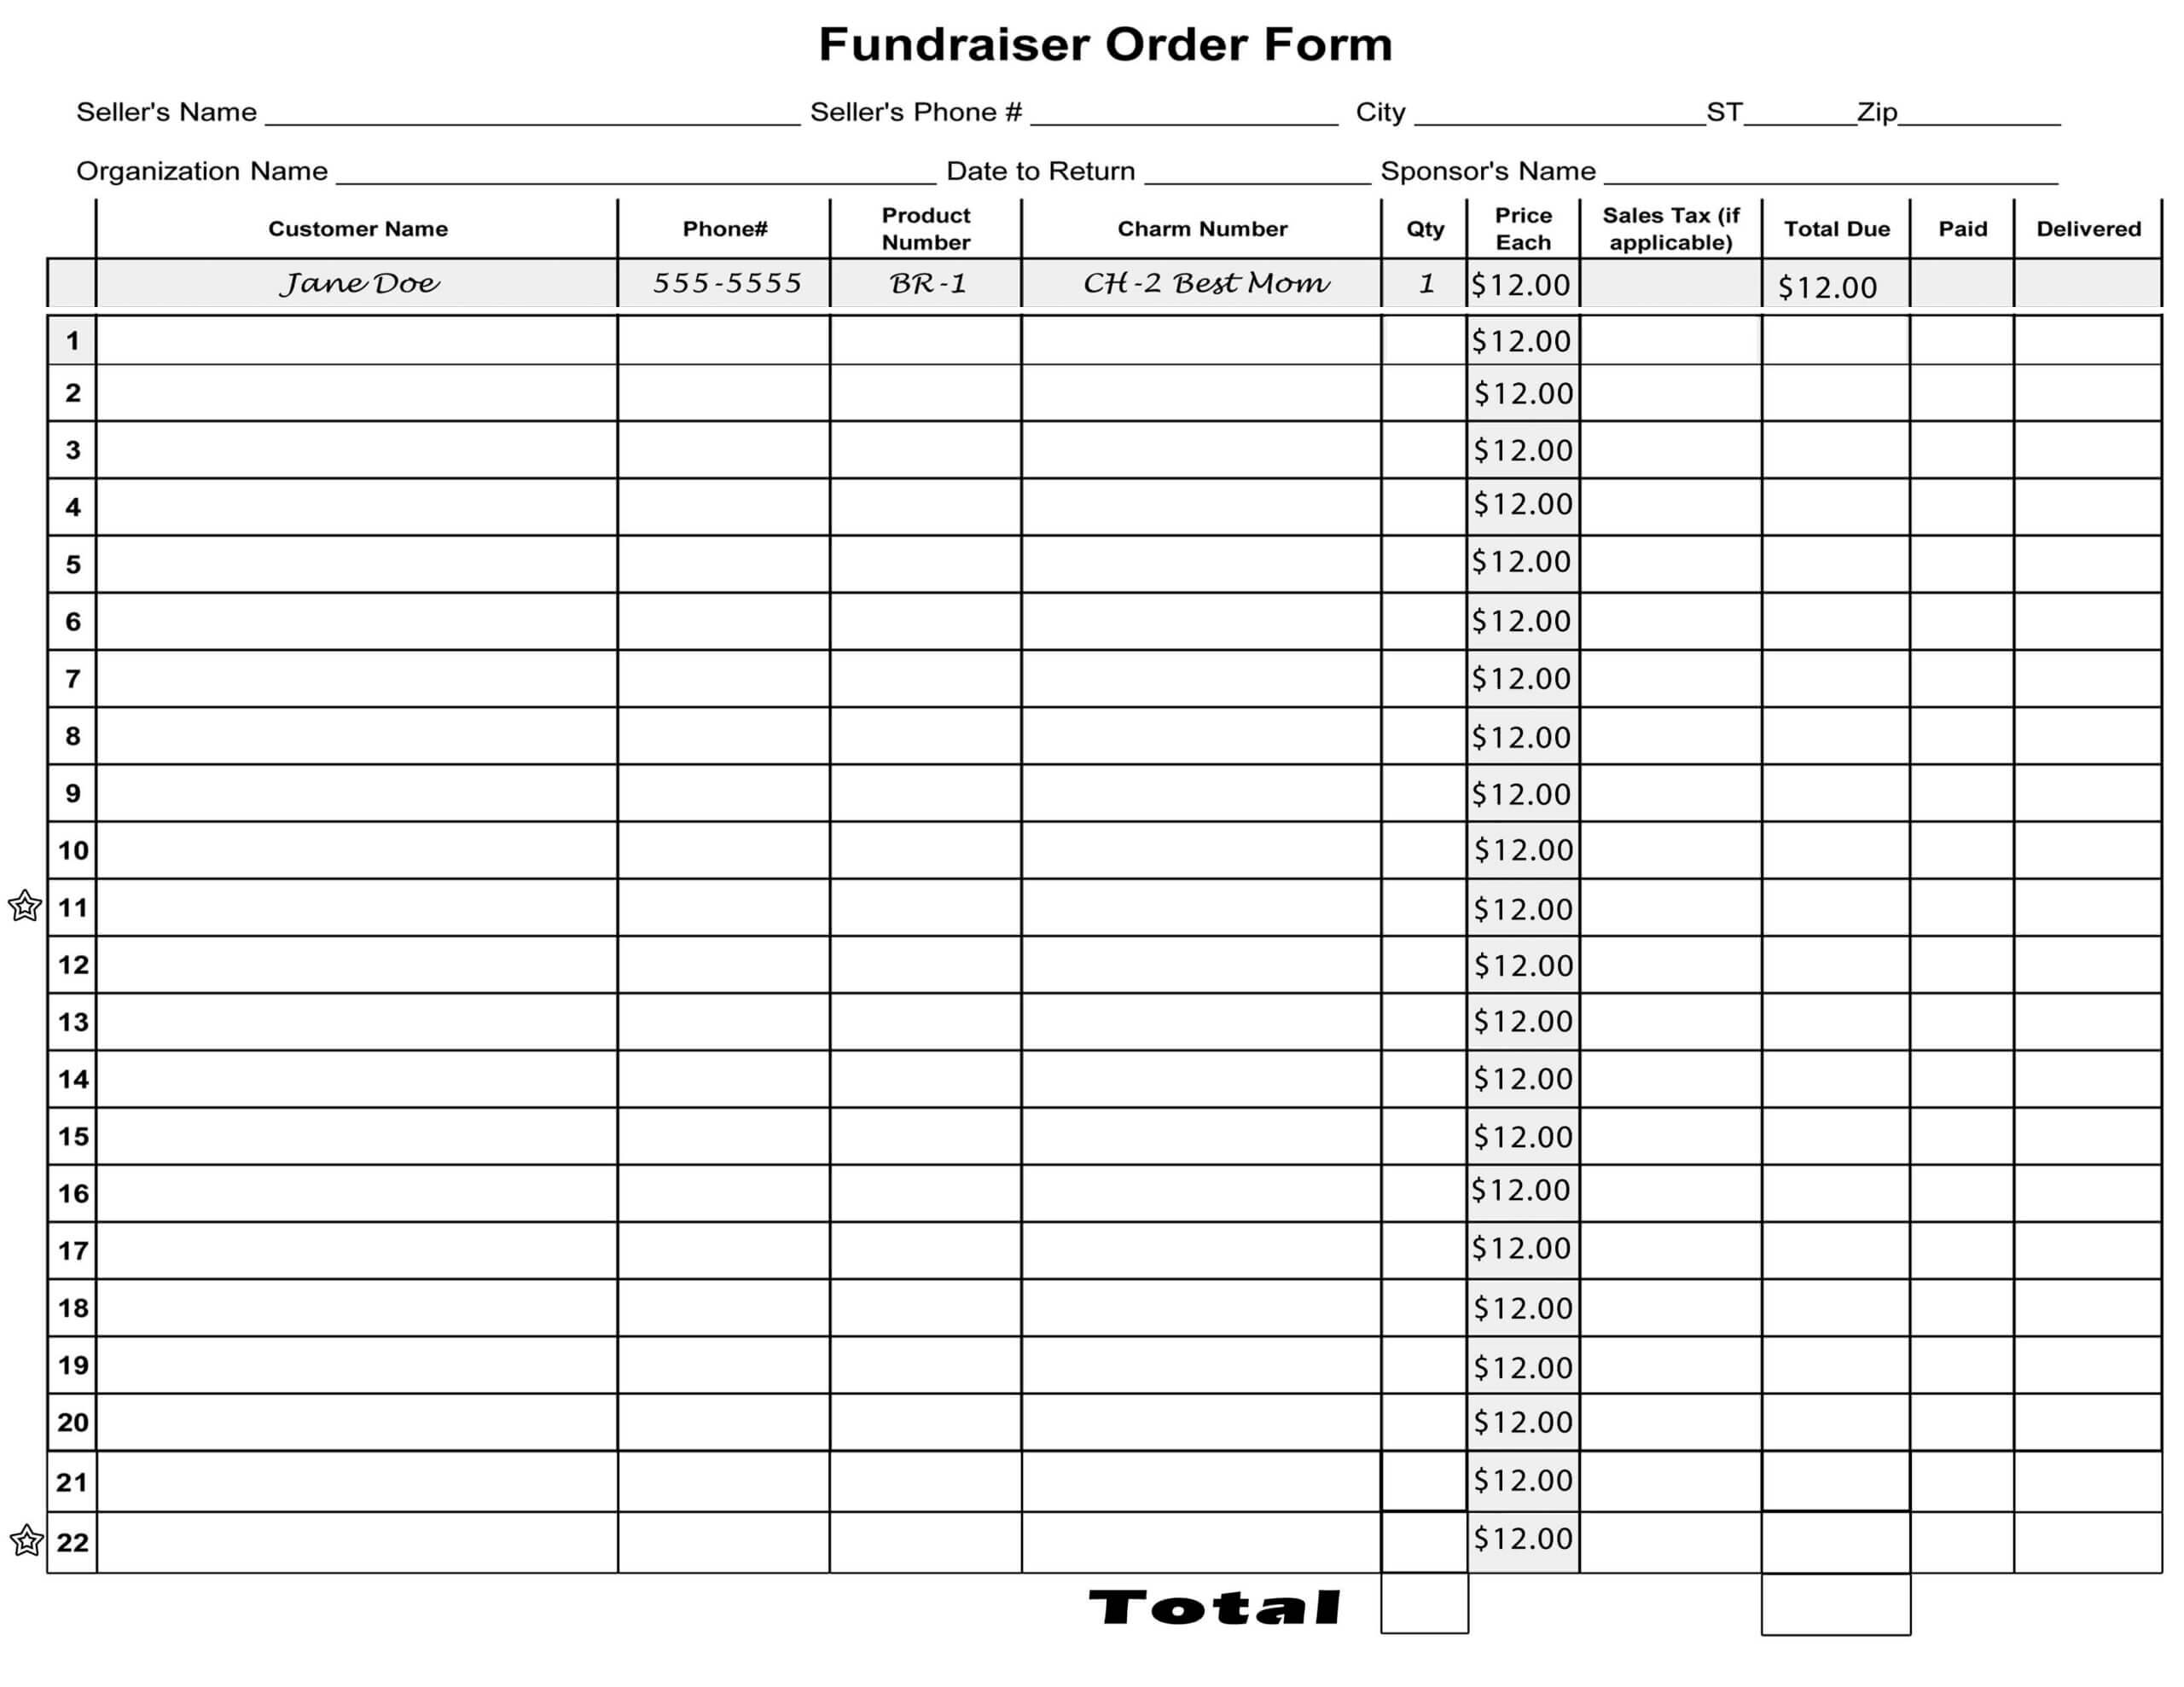 Free Blank Order Form Template | Blank Fundraiser Order Form With Blank Fundraiser Order Form Template